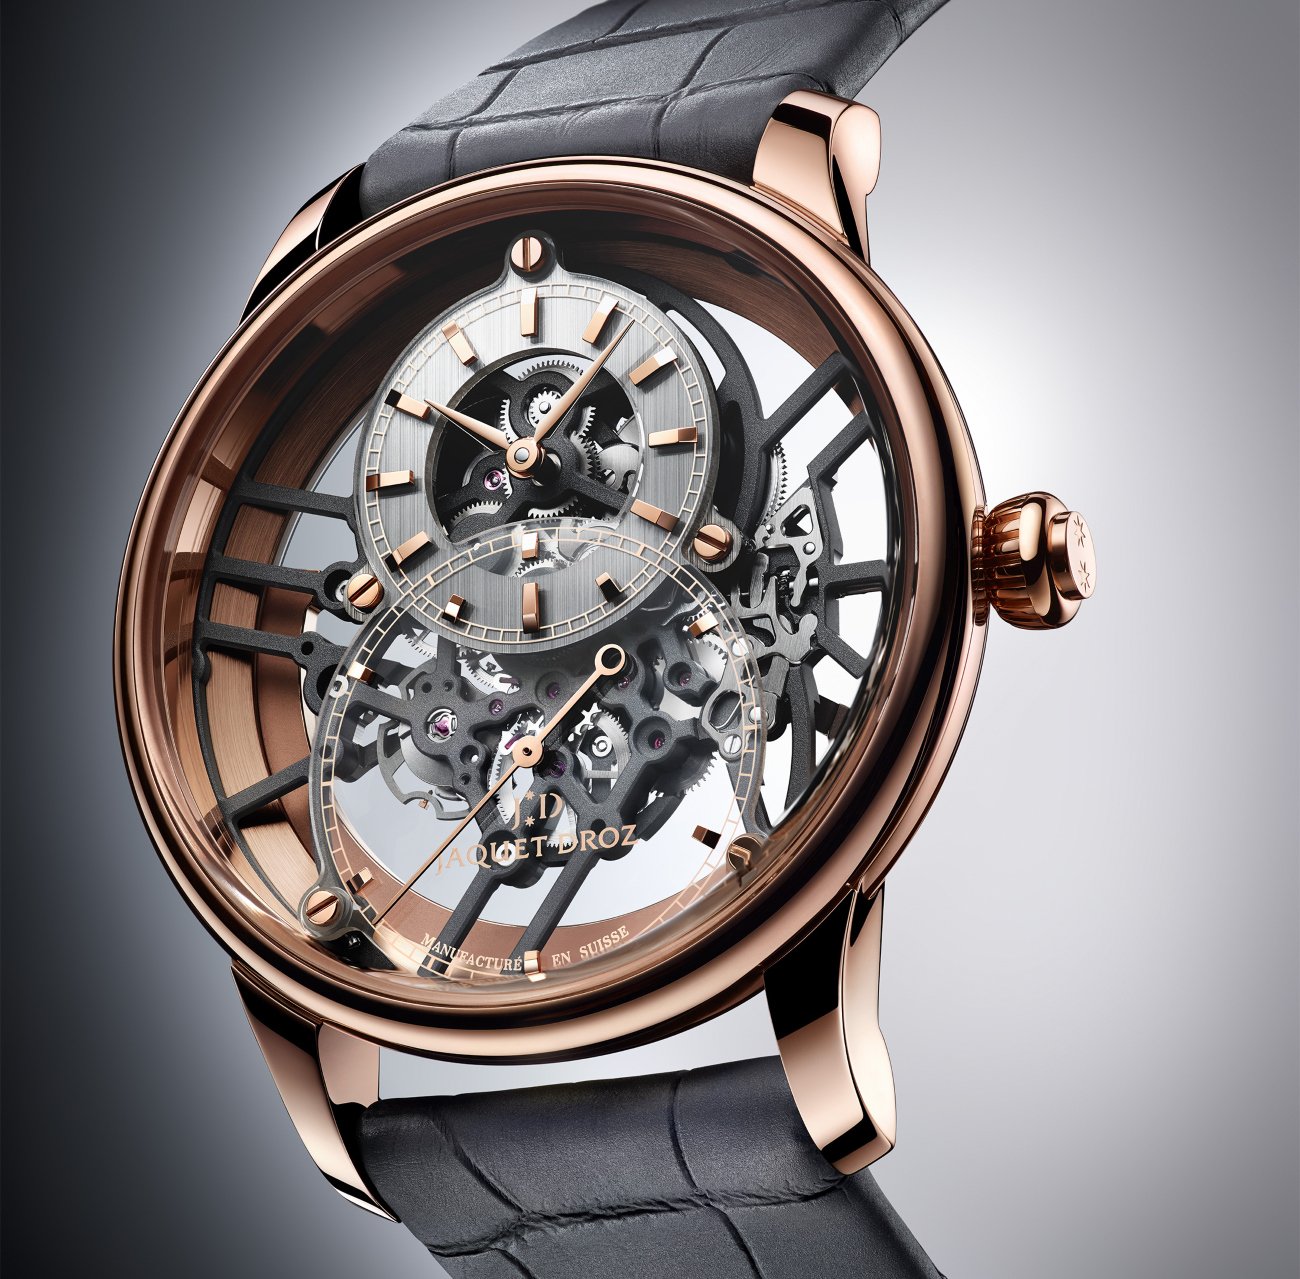 jaquet_droz_grande-seconde-skelet-one_ambiance_1_-_europa_star_watch_magazine_2020